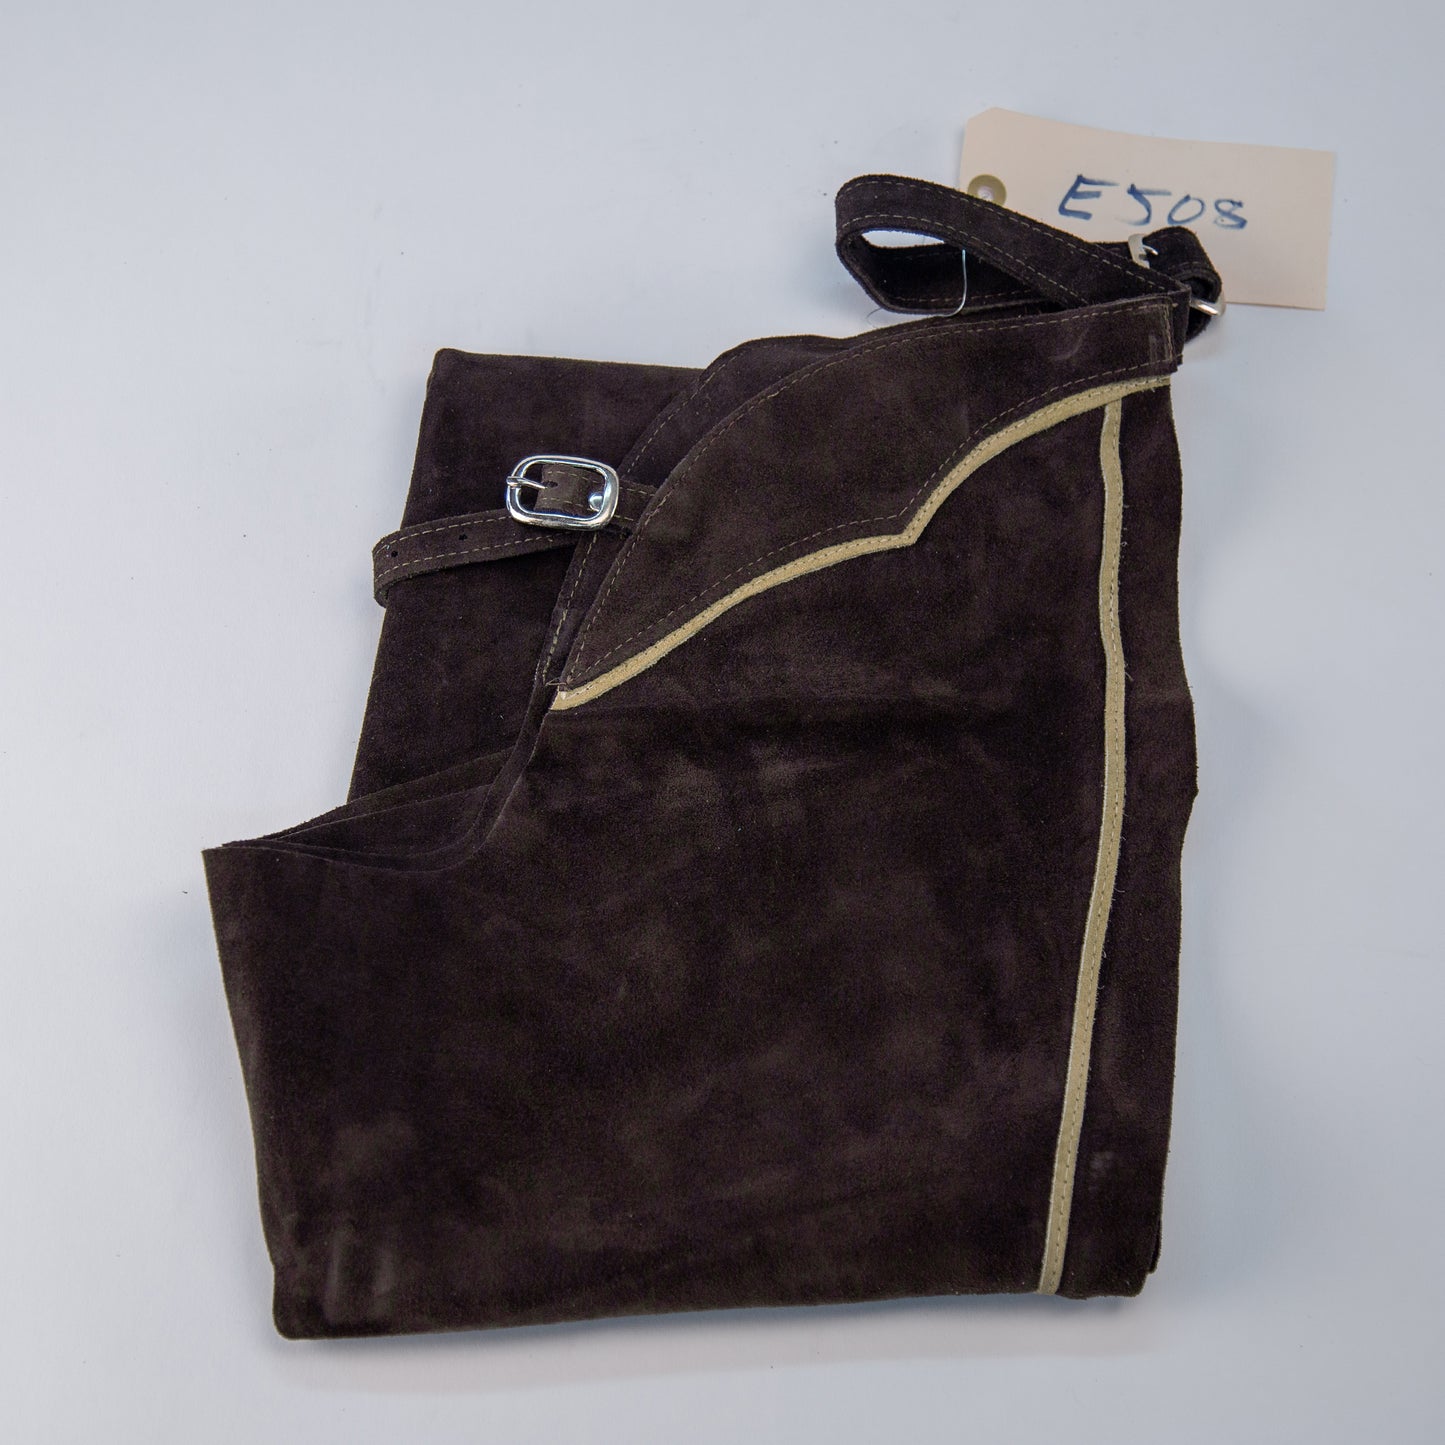 English Schooling Chaps - Brown Suede - Taupe Stripe